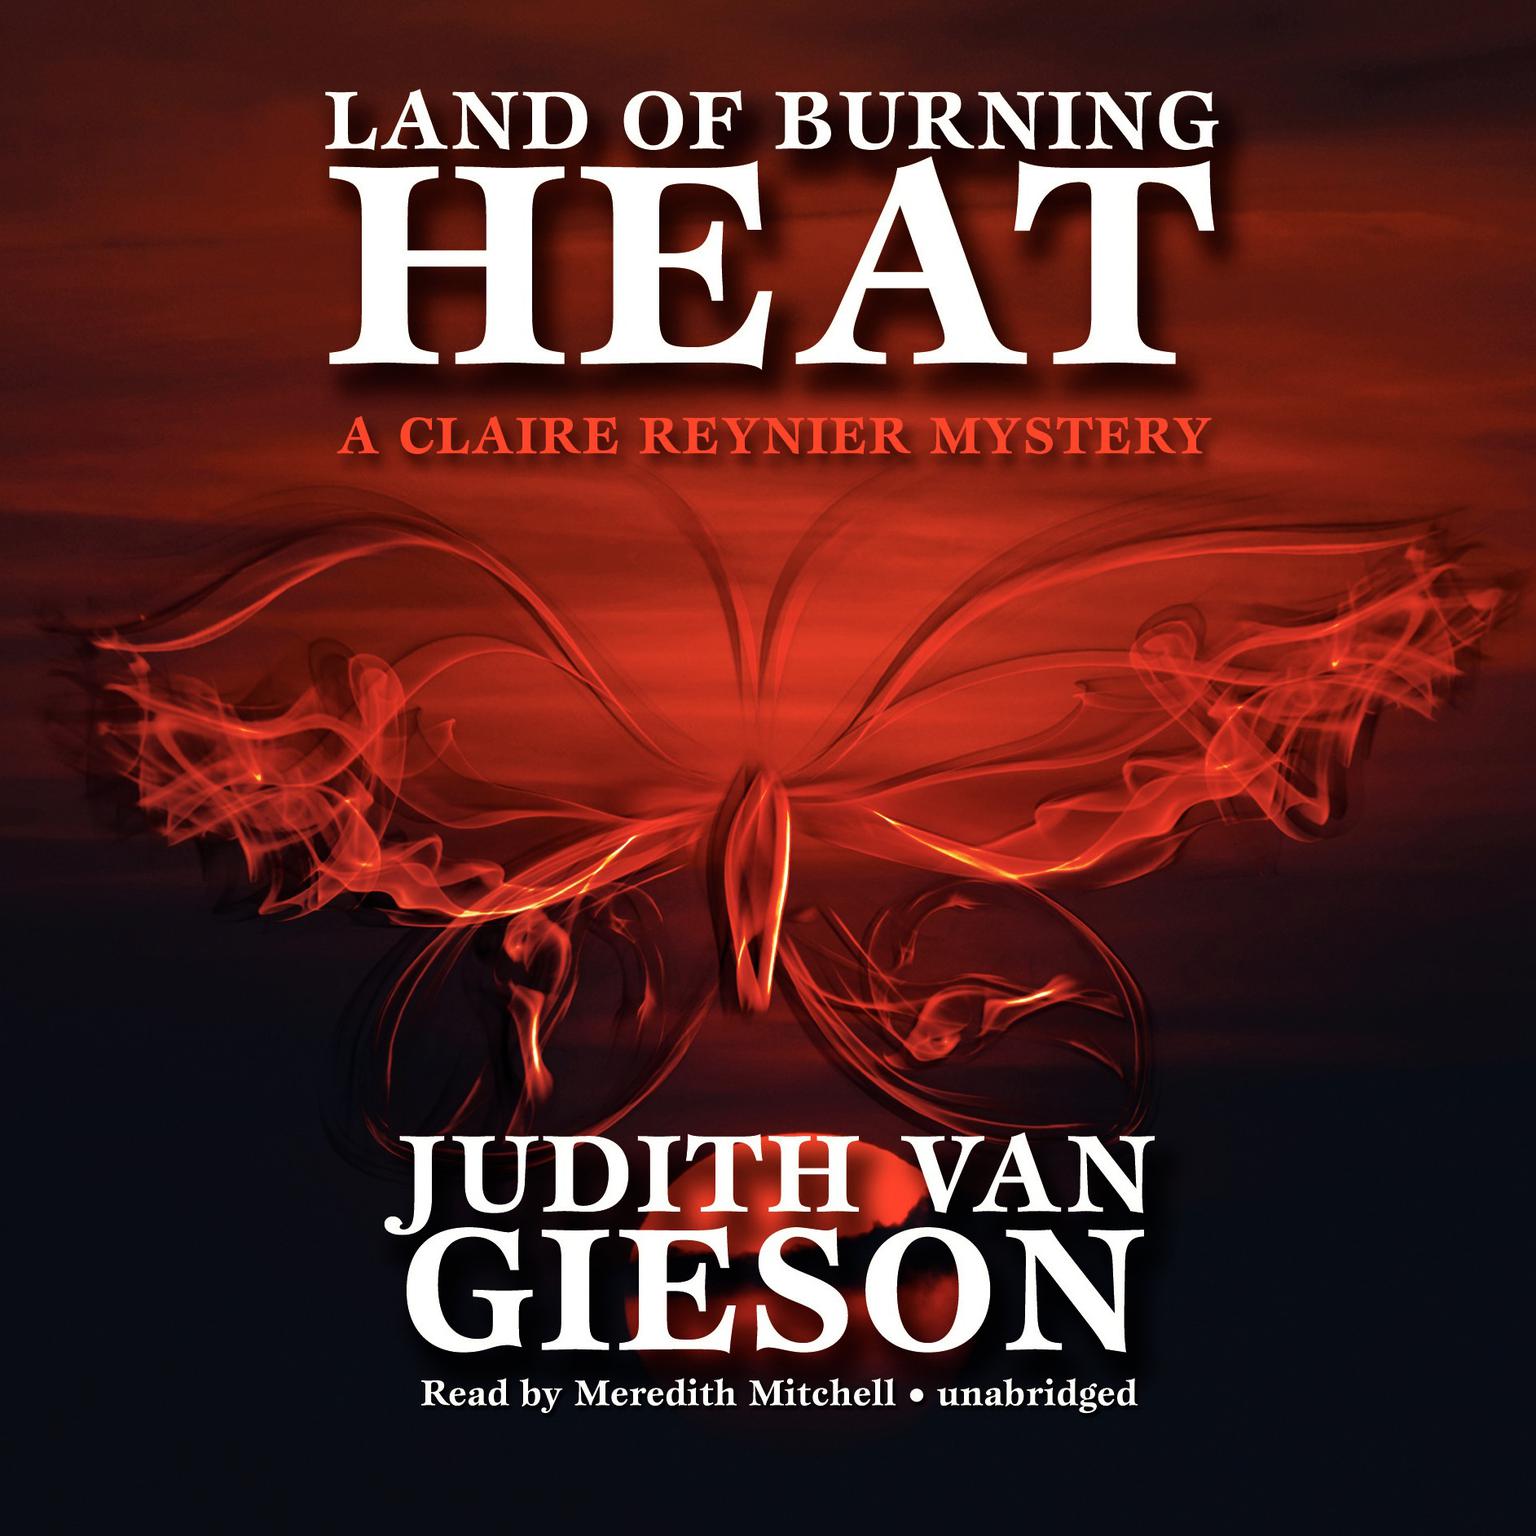 Land of Burning Heat: A Claire Reynier Mystery Audiobook, by Judith Van Gieson